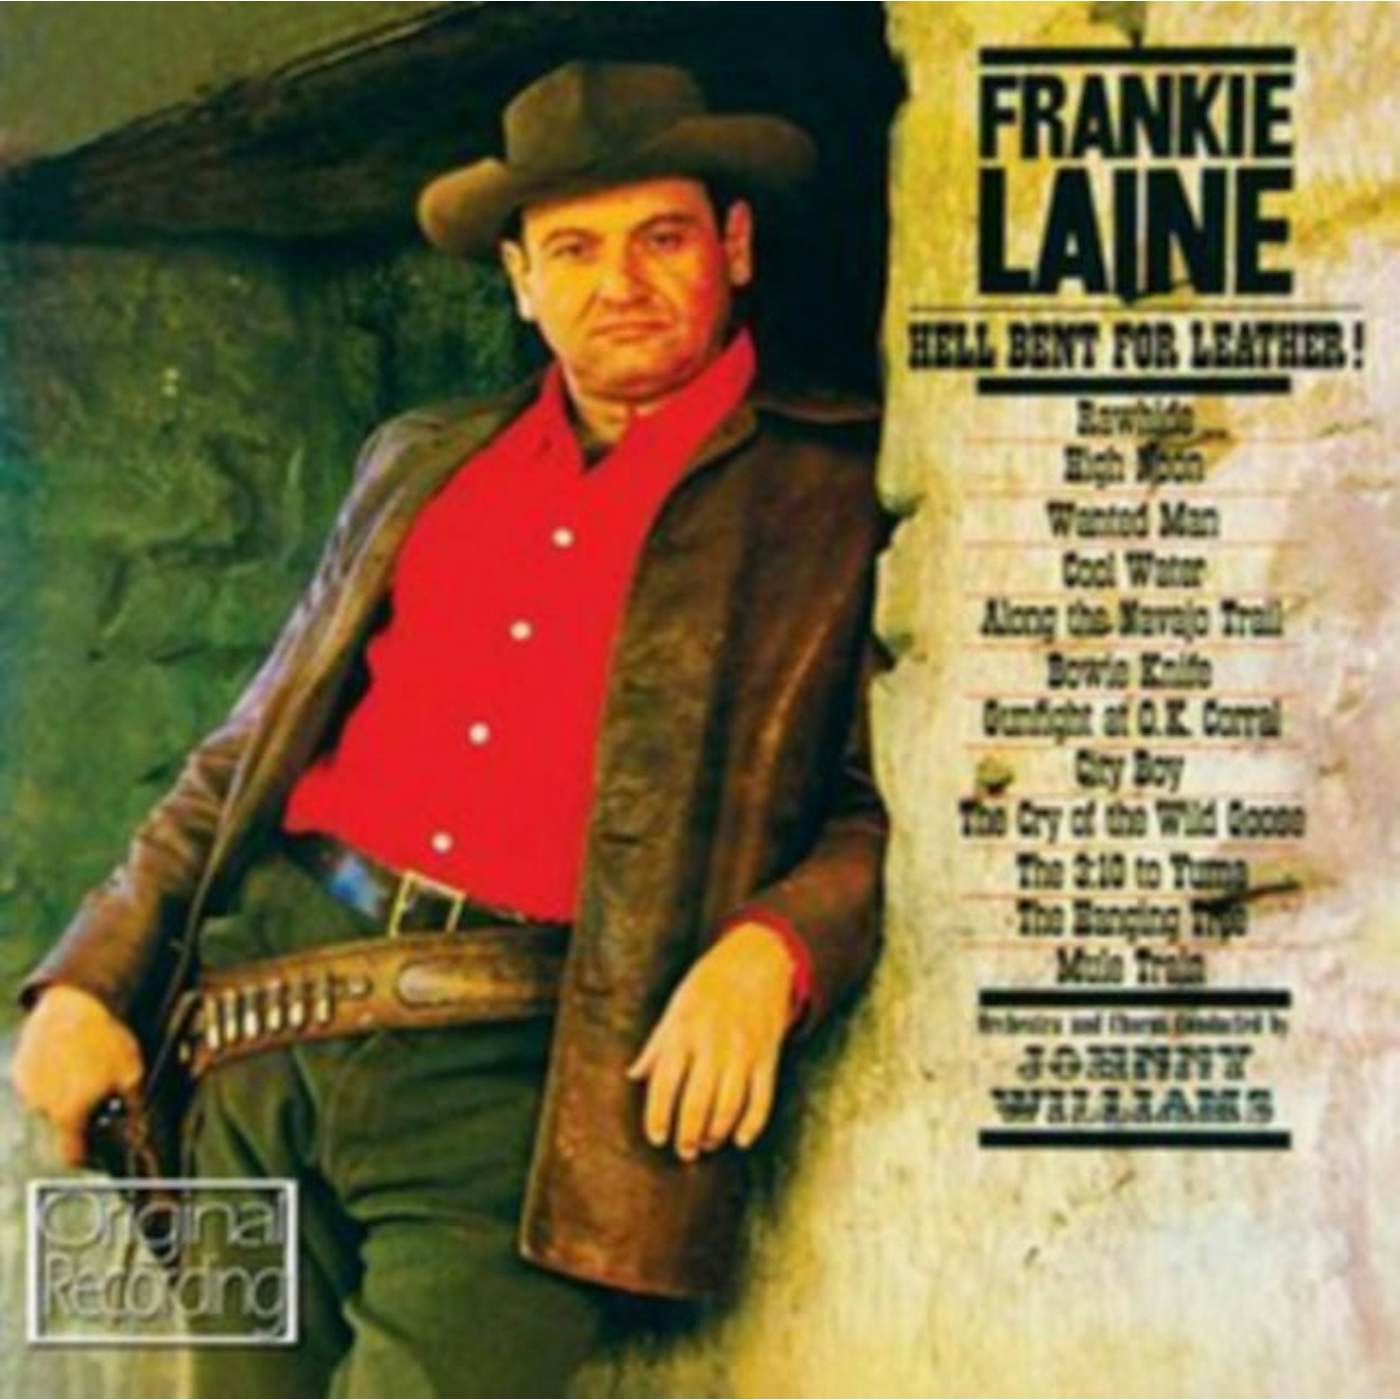 Frankie Laine CD - Hell Bent For Leather